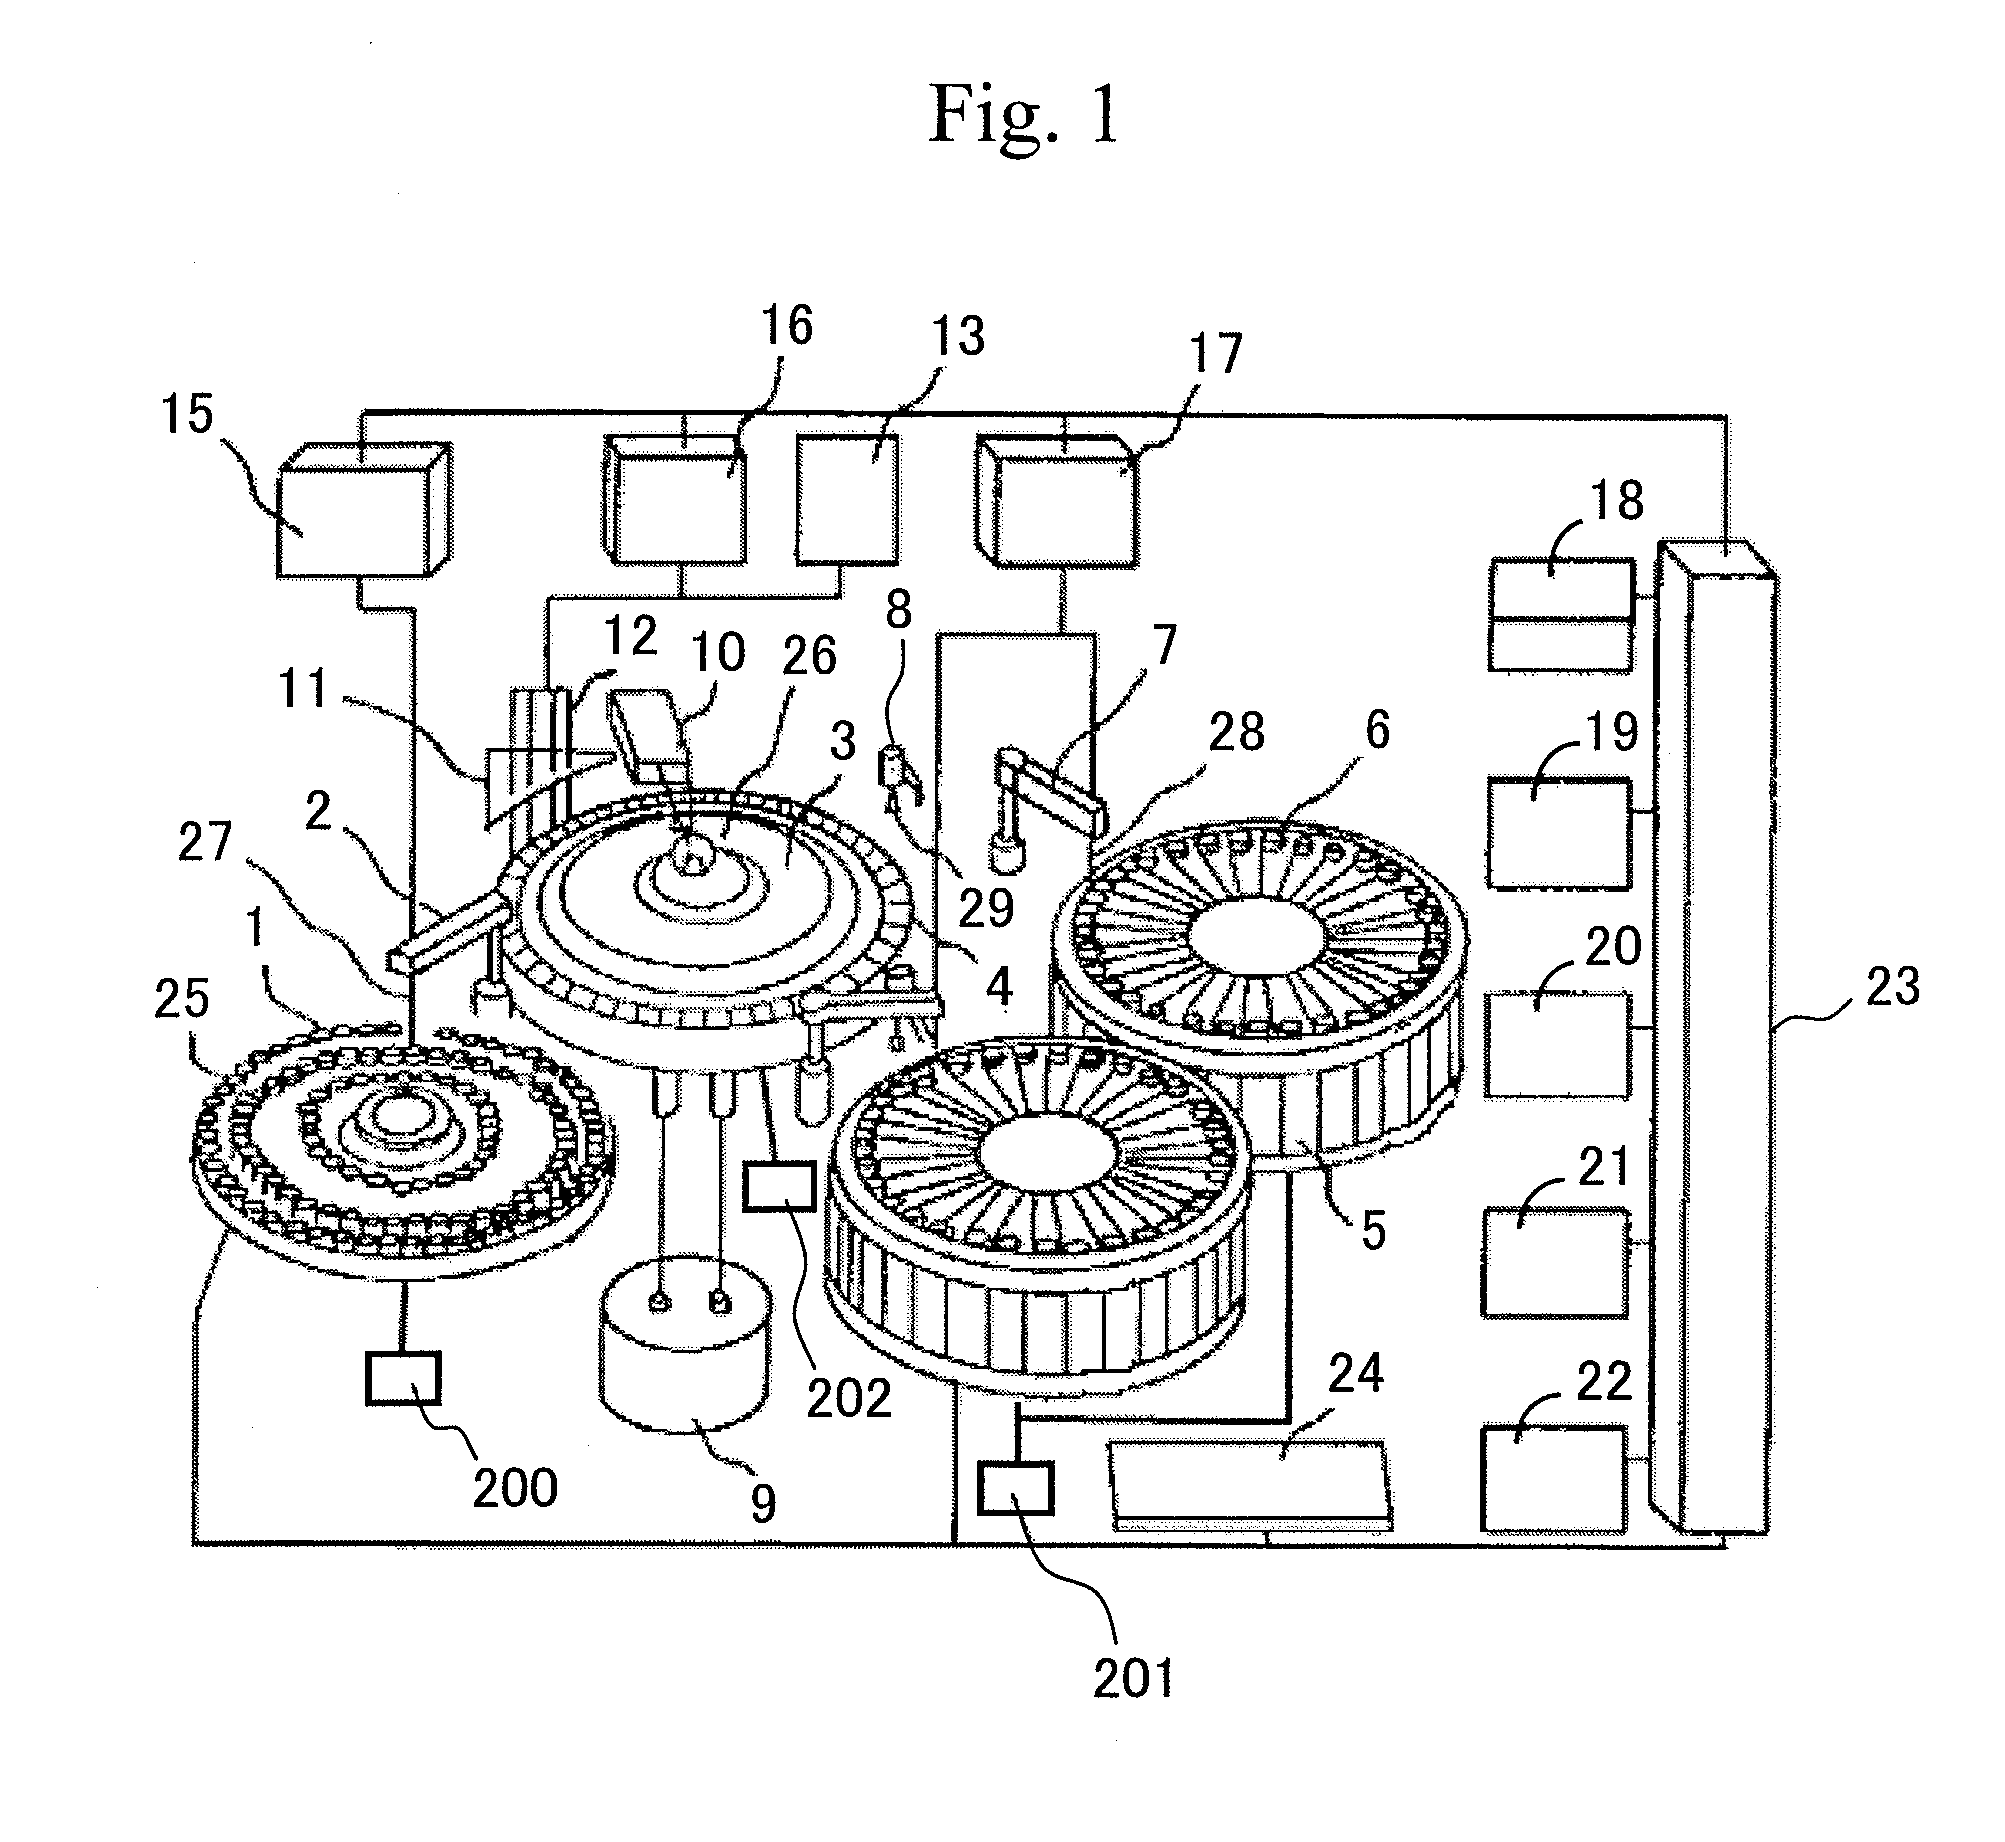 Dispensing Nozzle for Autoanalyzer, Autoanalyzer Equipped with the Nozzle, and Method for Producing Dispensing Nozzle for Autoanalyzer